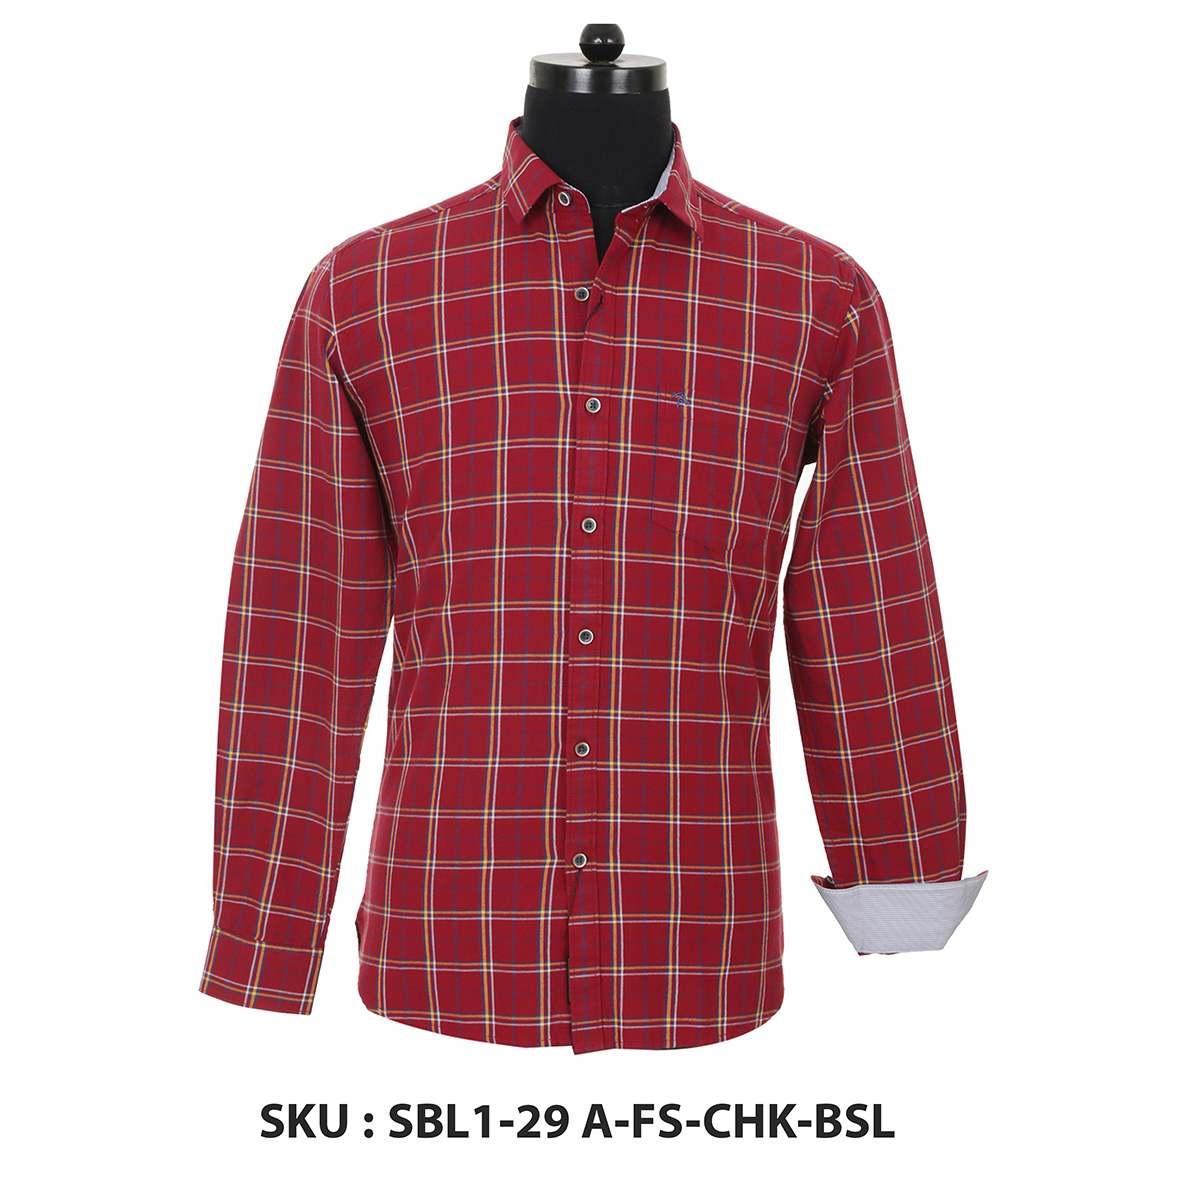 Classic Polo Mens Woven Shirt Sbl1-29 A-Fs-Chk-Bsl Red L